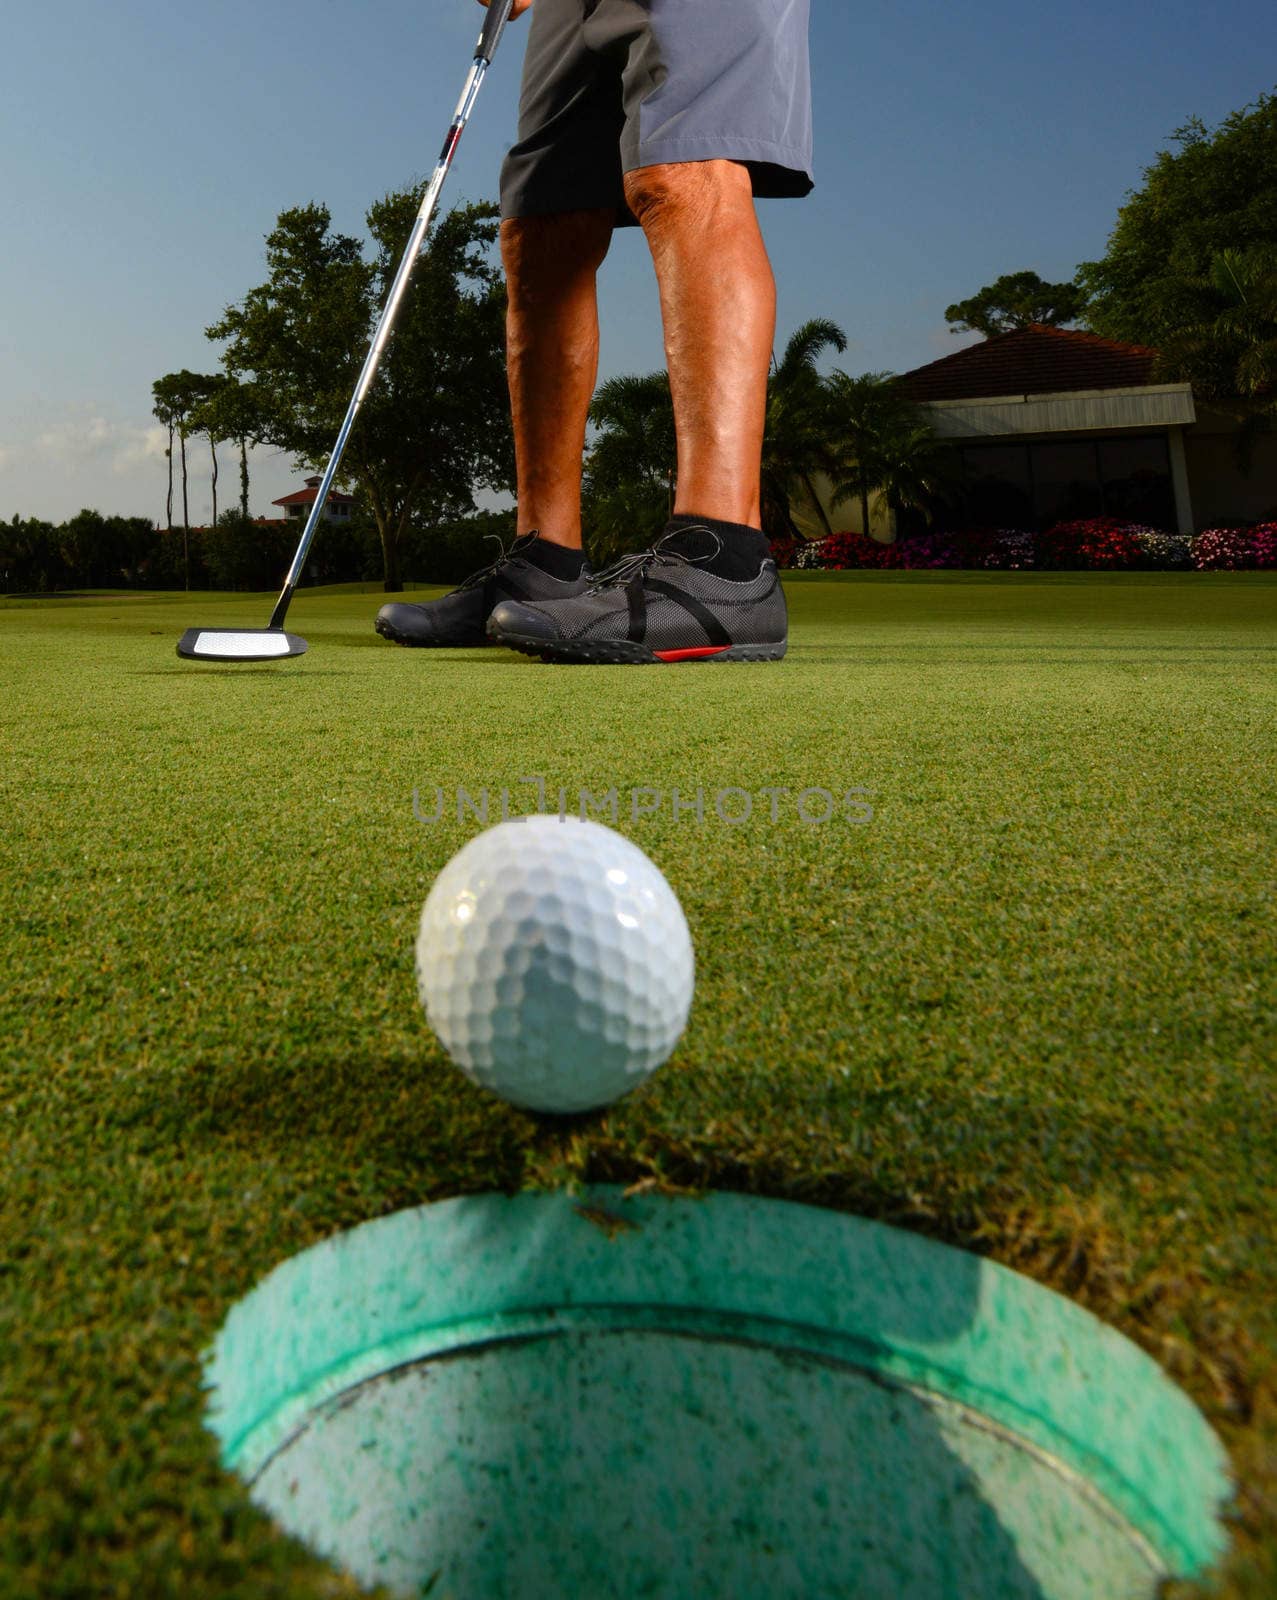 Golfer golfing and close-up of golf ball by ftlaudgirl